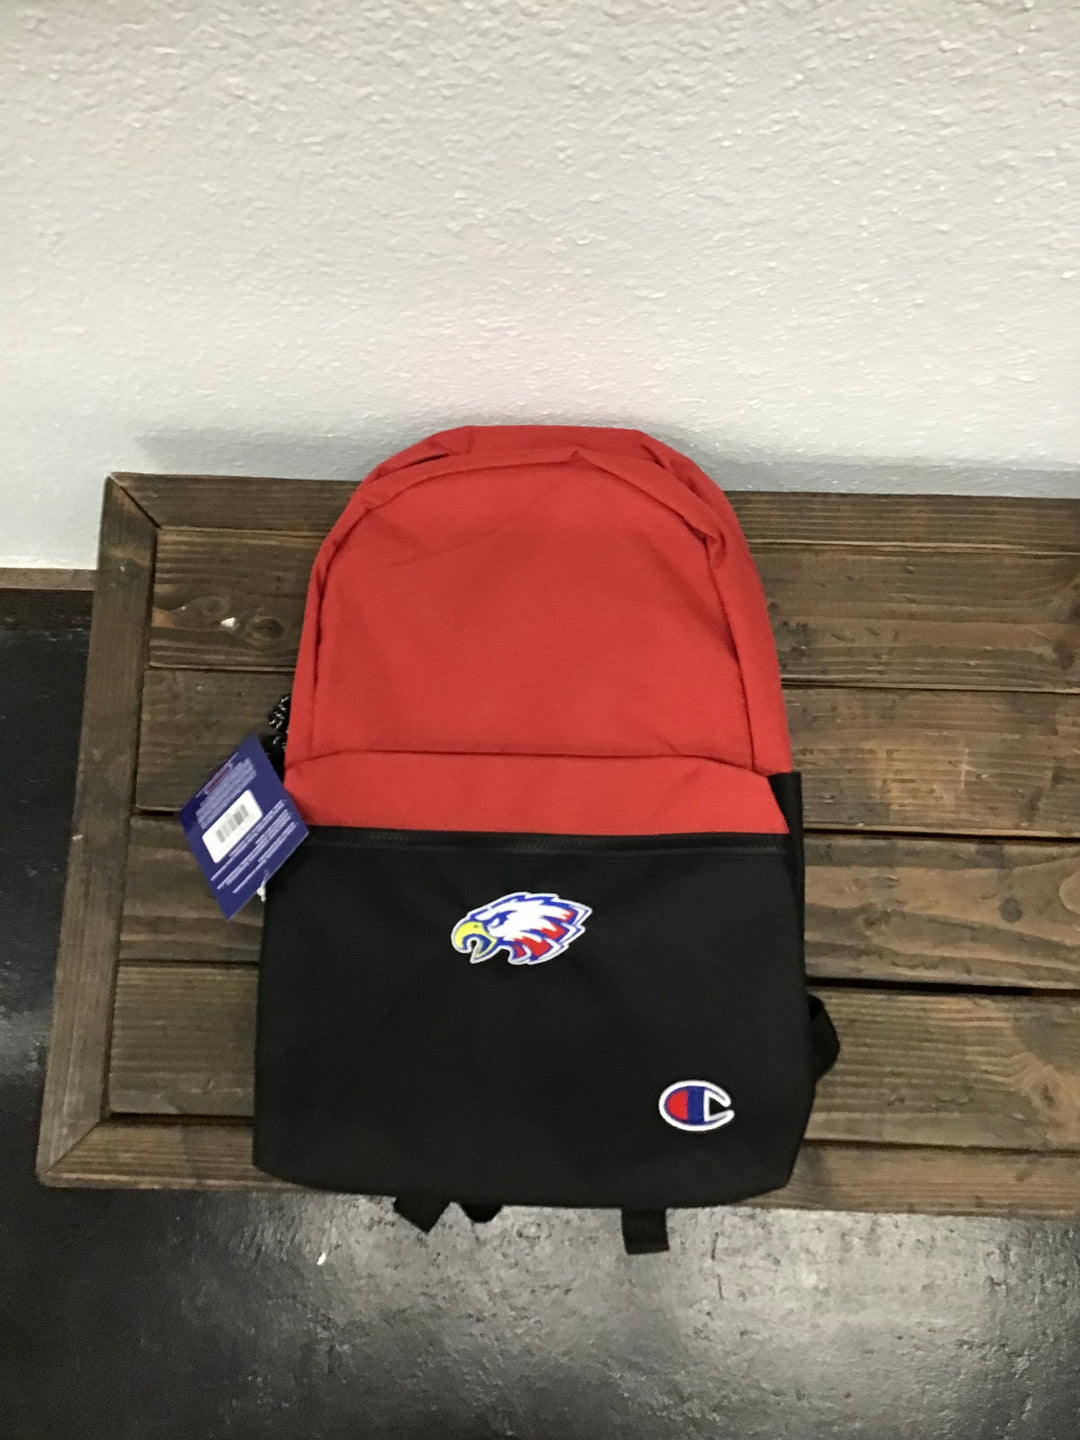 Champion back pack with antique red on top and black on bottom. Front zipper pocket and slit pockets on each side.